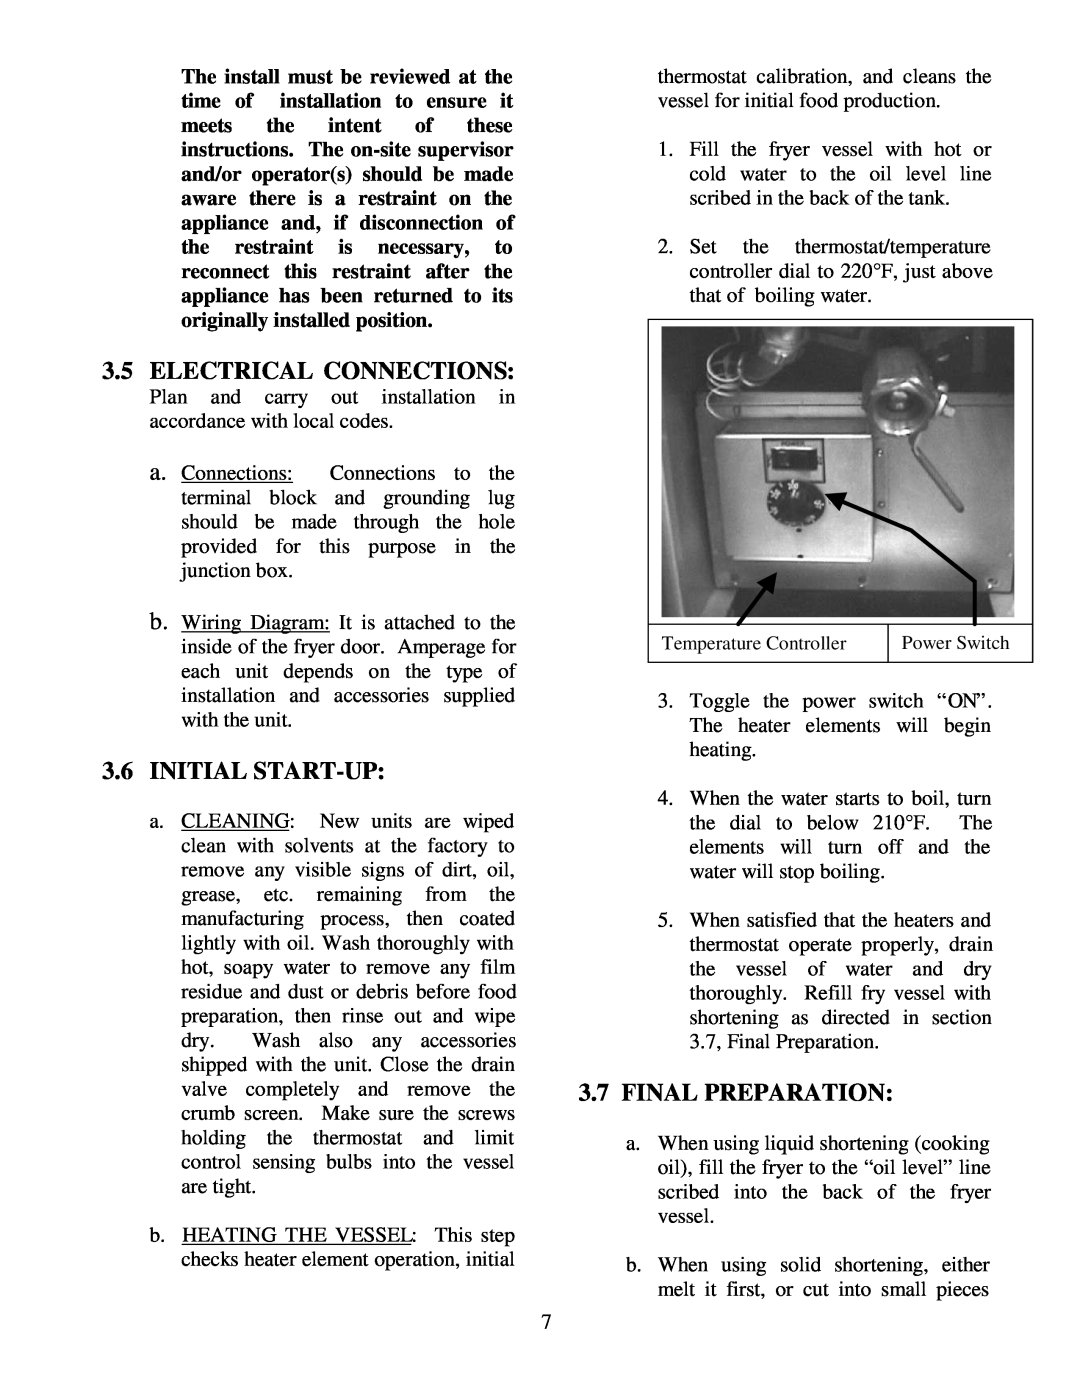 Frymaster 38 Series operation manual Electrical Connections, 3.6INITIAL START-UP, 3.7FINAL PREPARATION 